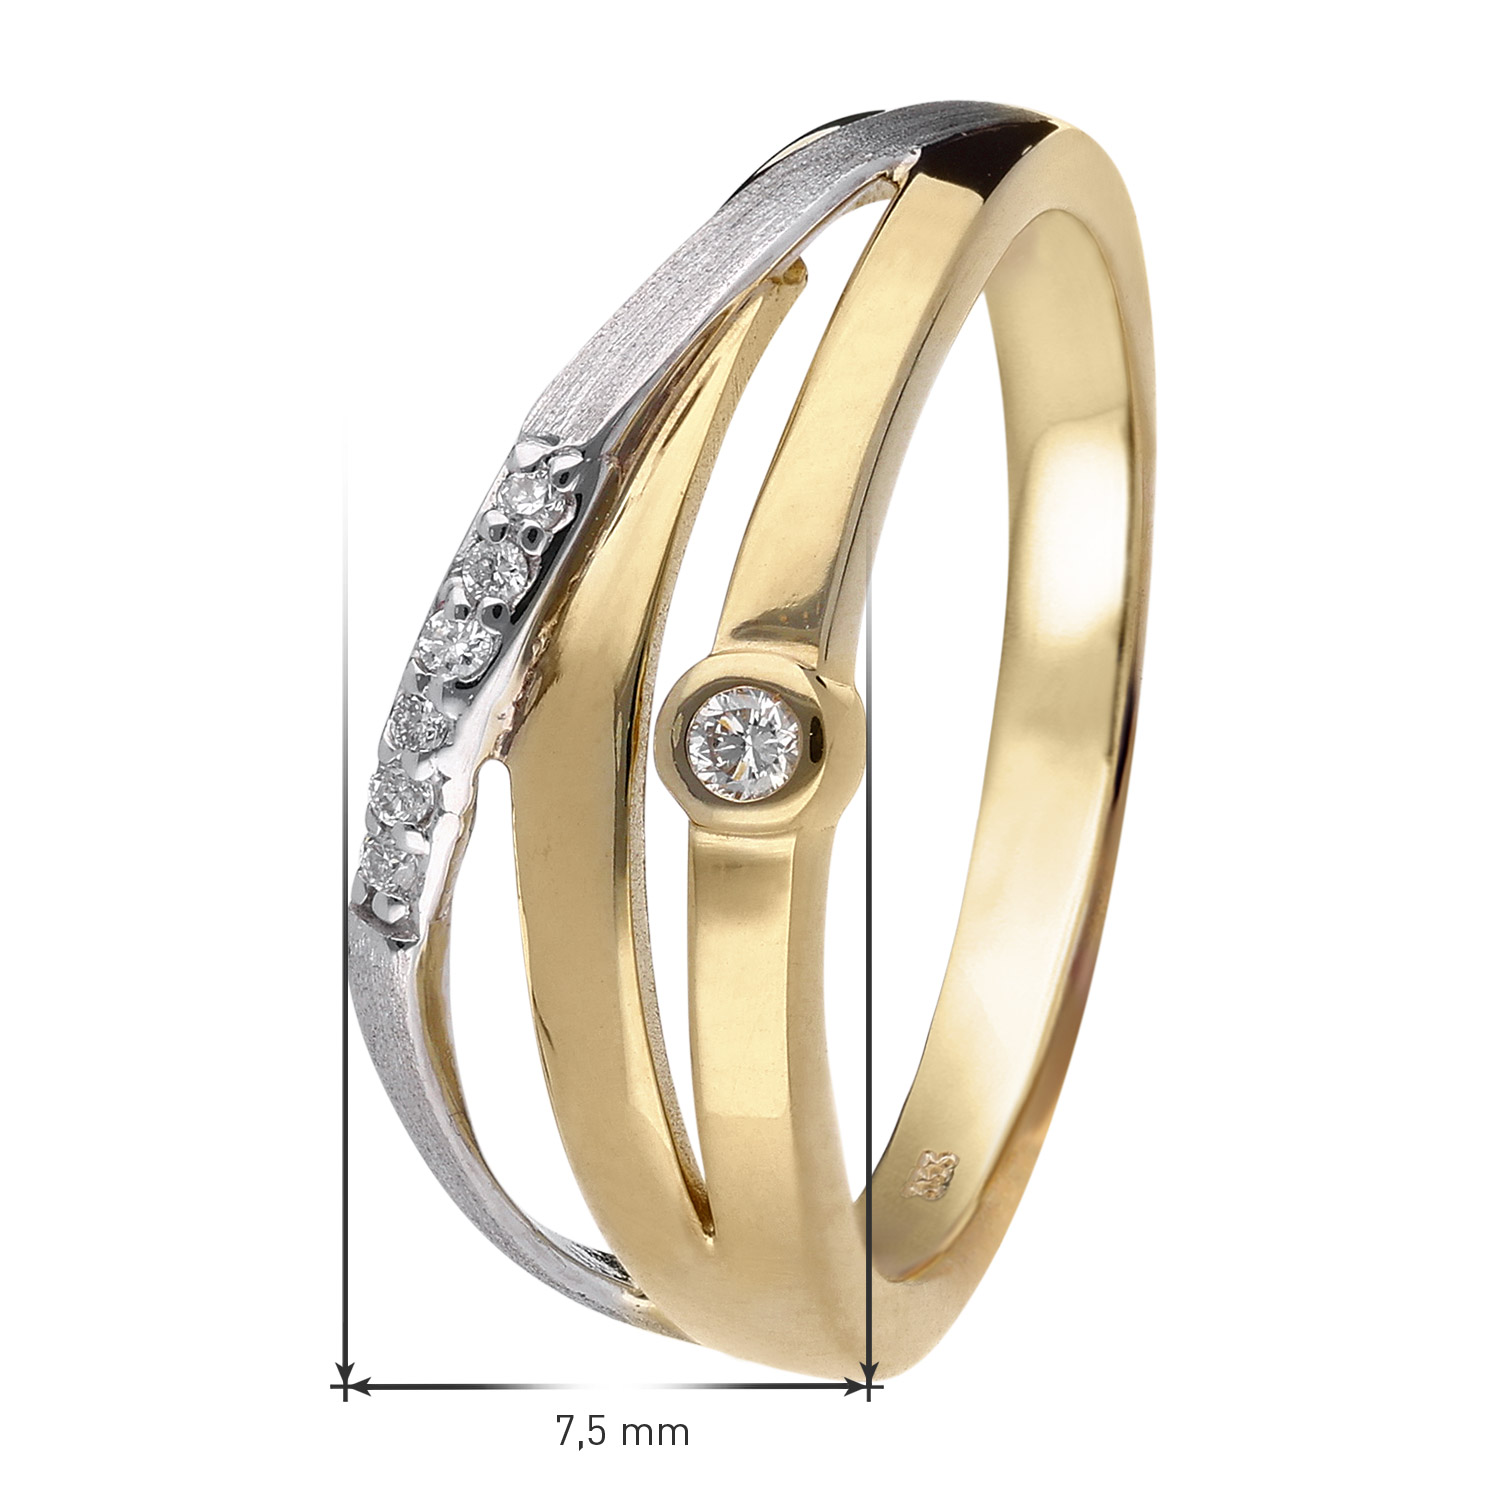 trendor Ladies' Ring with Diamonds Gold 333/8K Two-Tone 15577 • uhrcenter